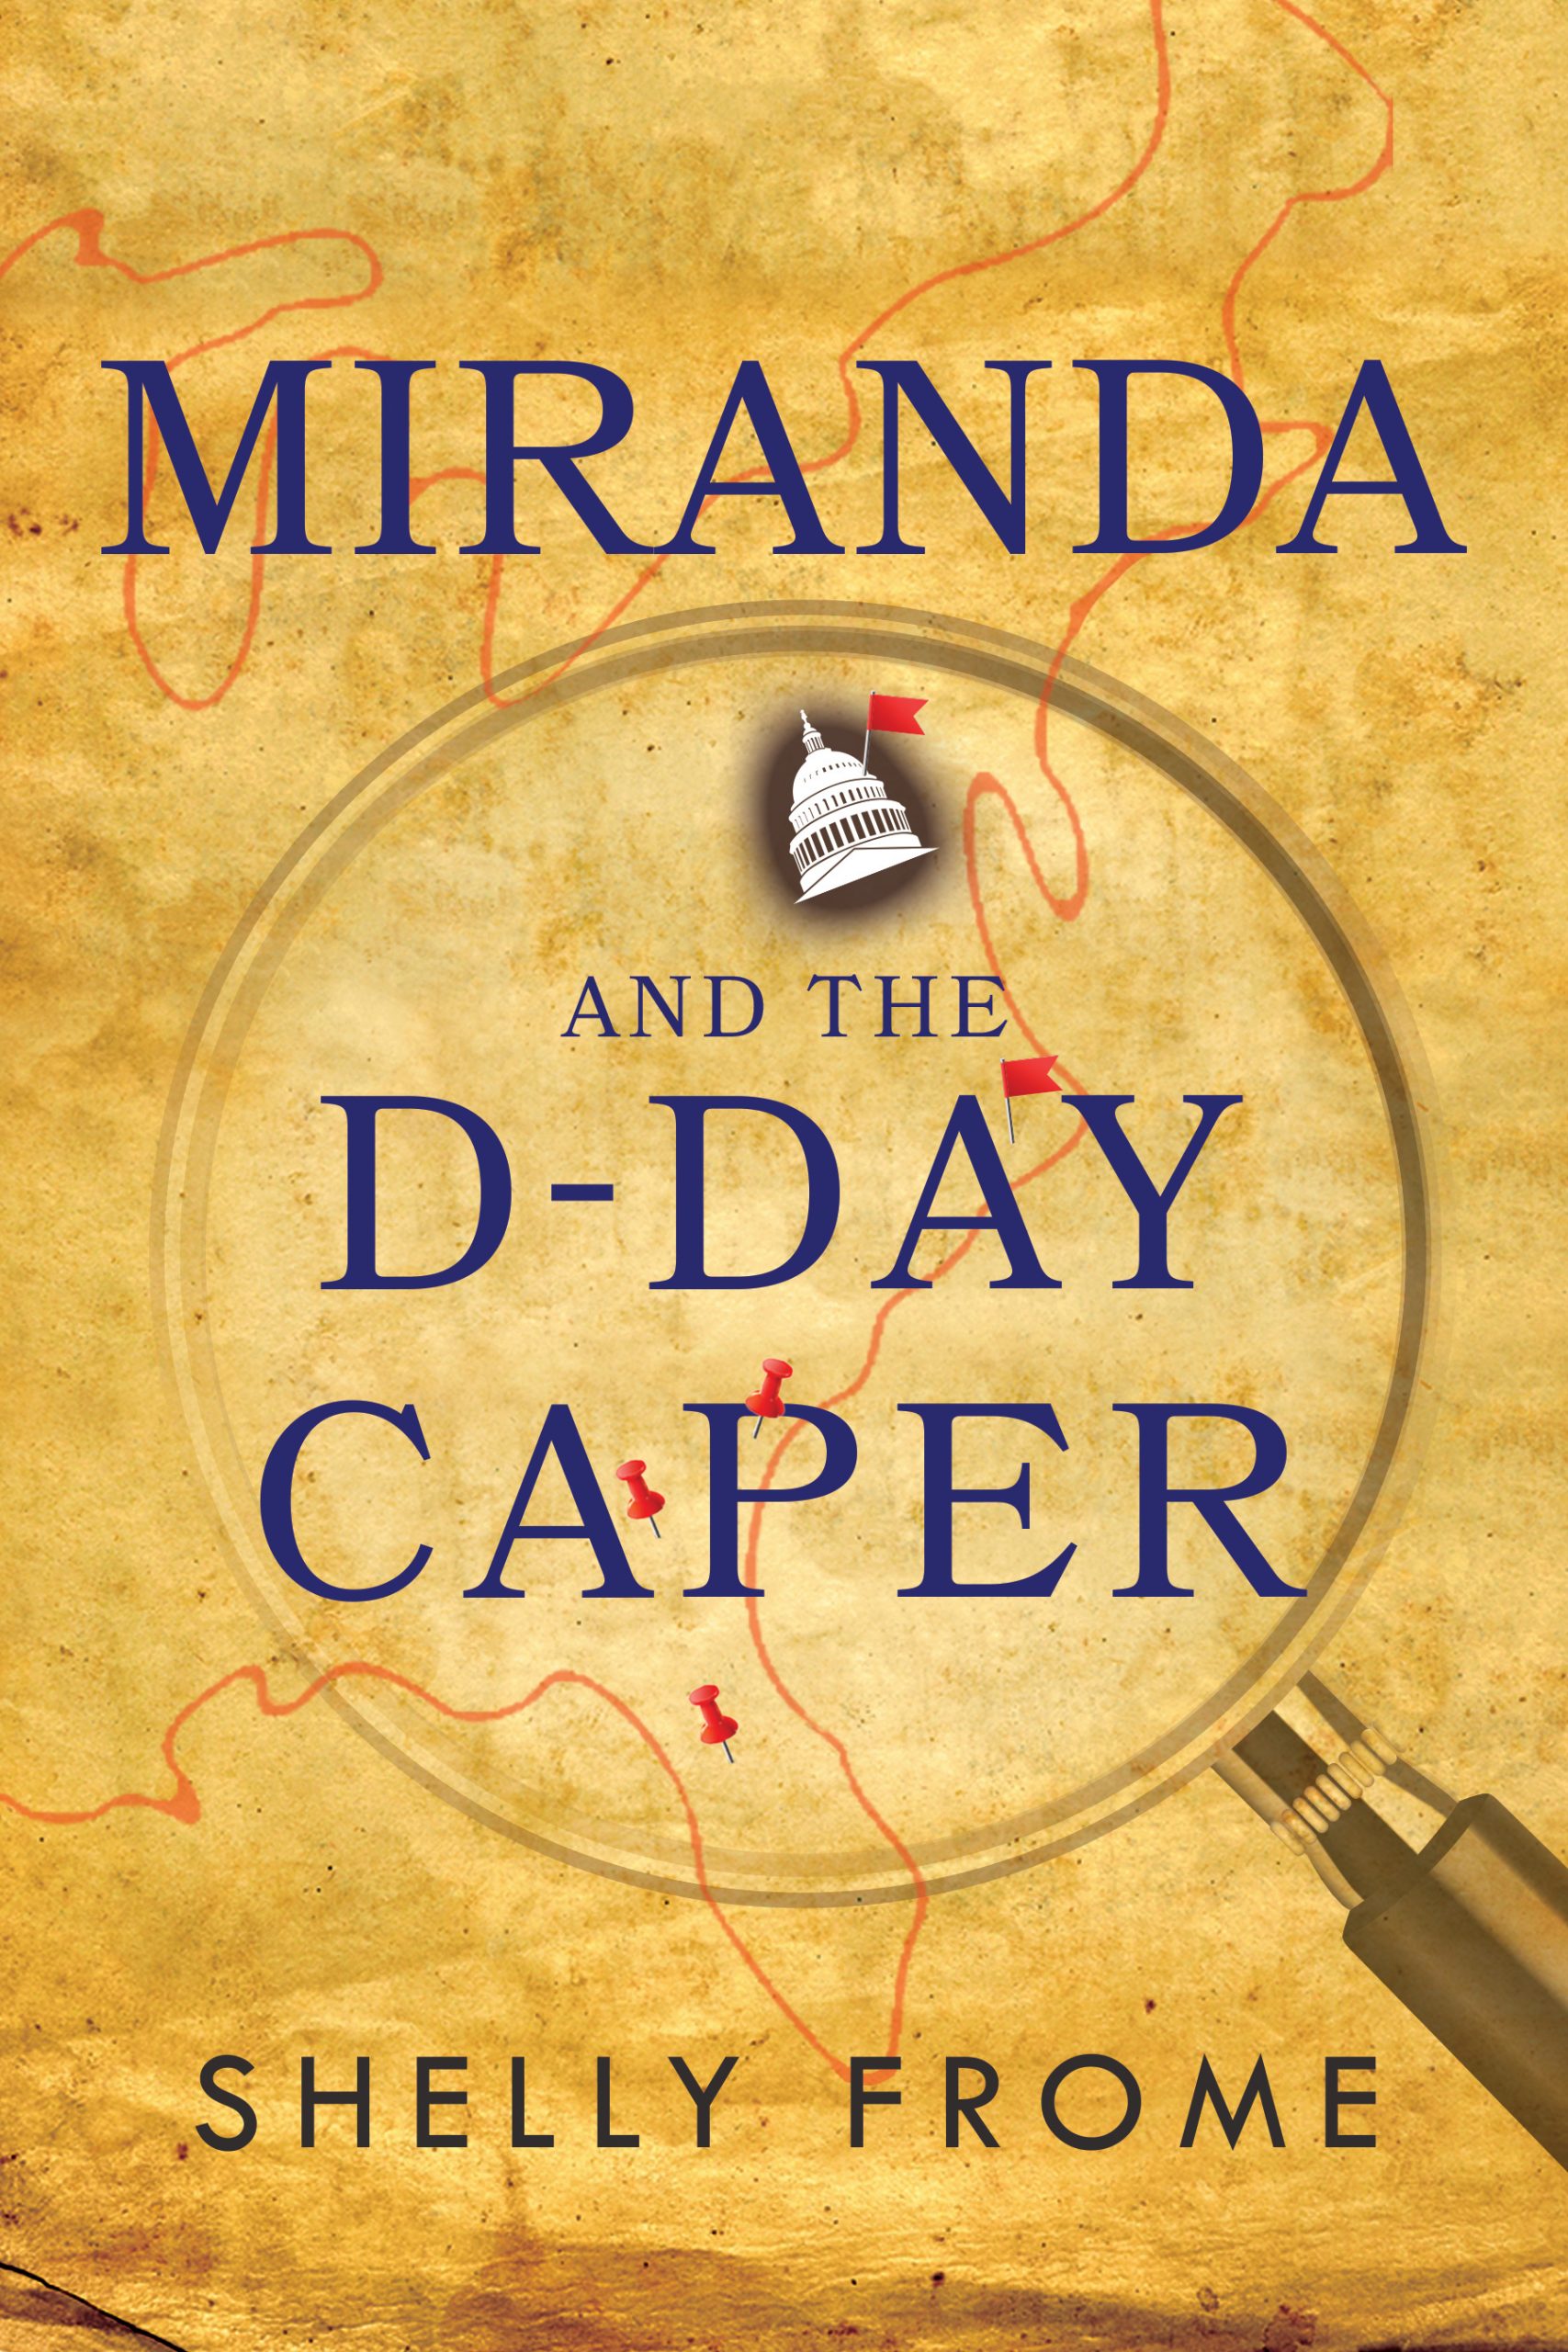 Miranda and the D-Day Caper by Shelly Frome